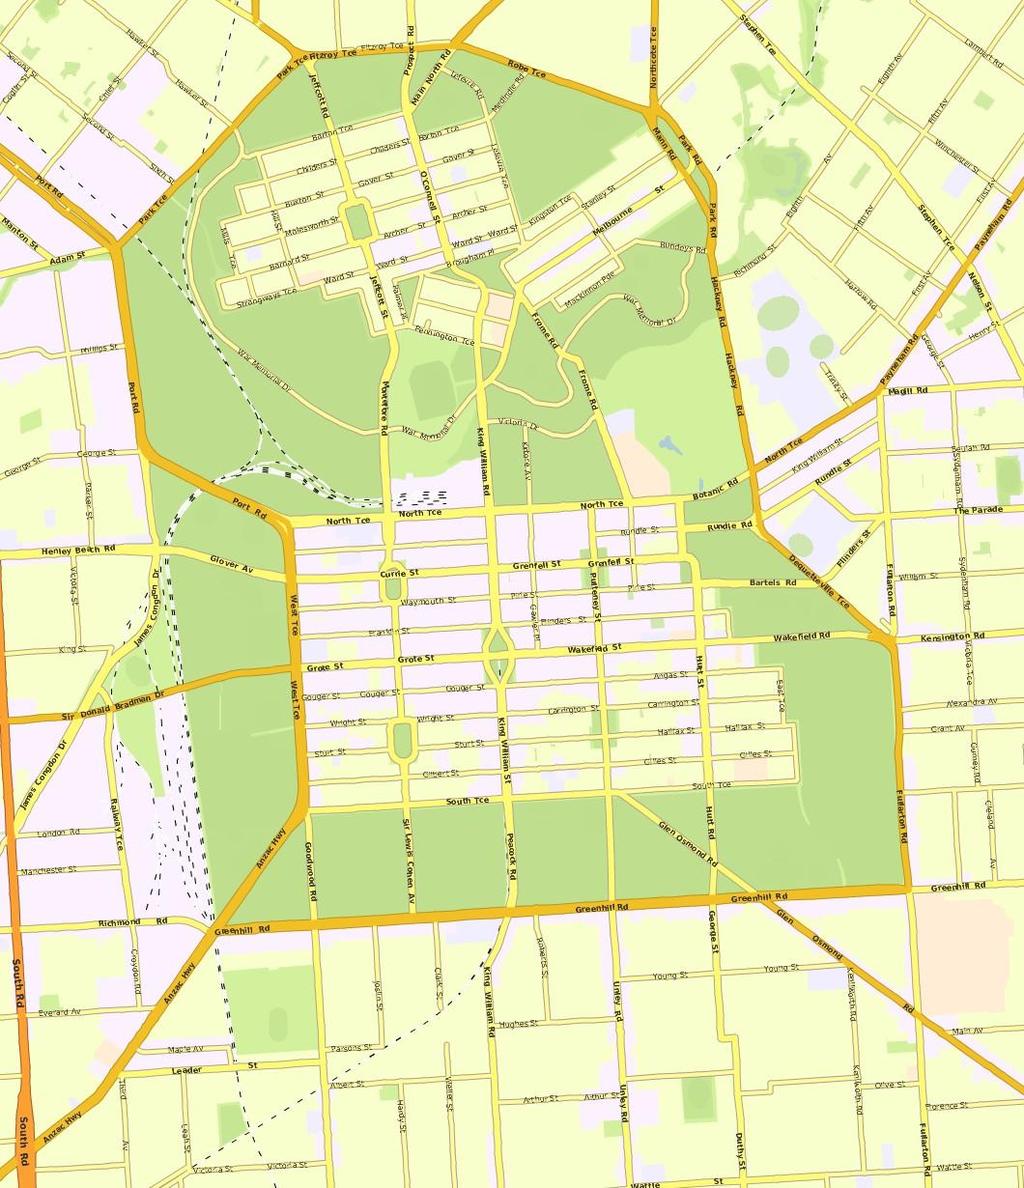 ADELAIDE Suburb Map Prepared on 0/07/08 by Your Property Expert, 08 8 5900 at Ray White Adelaide. Property Data Solutions Pty Ltd 08 (pricefinder.com.